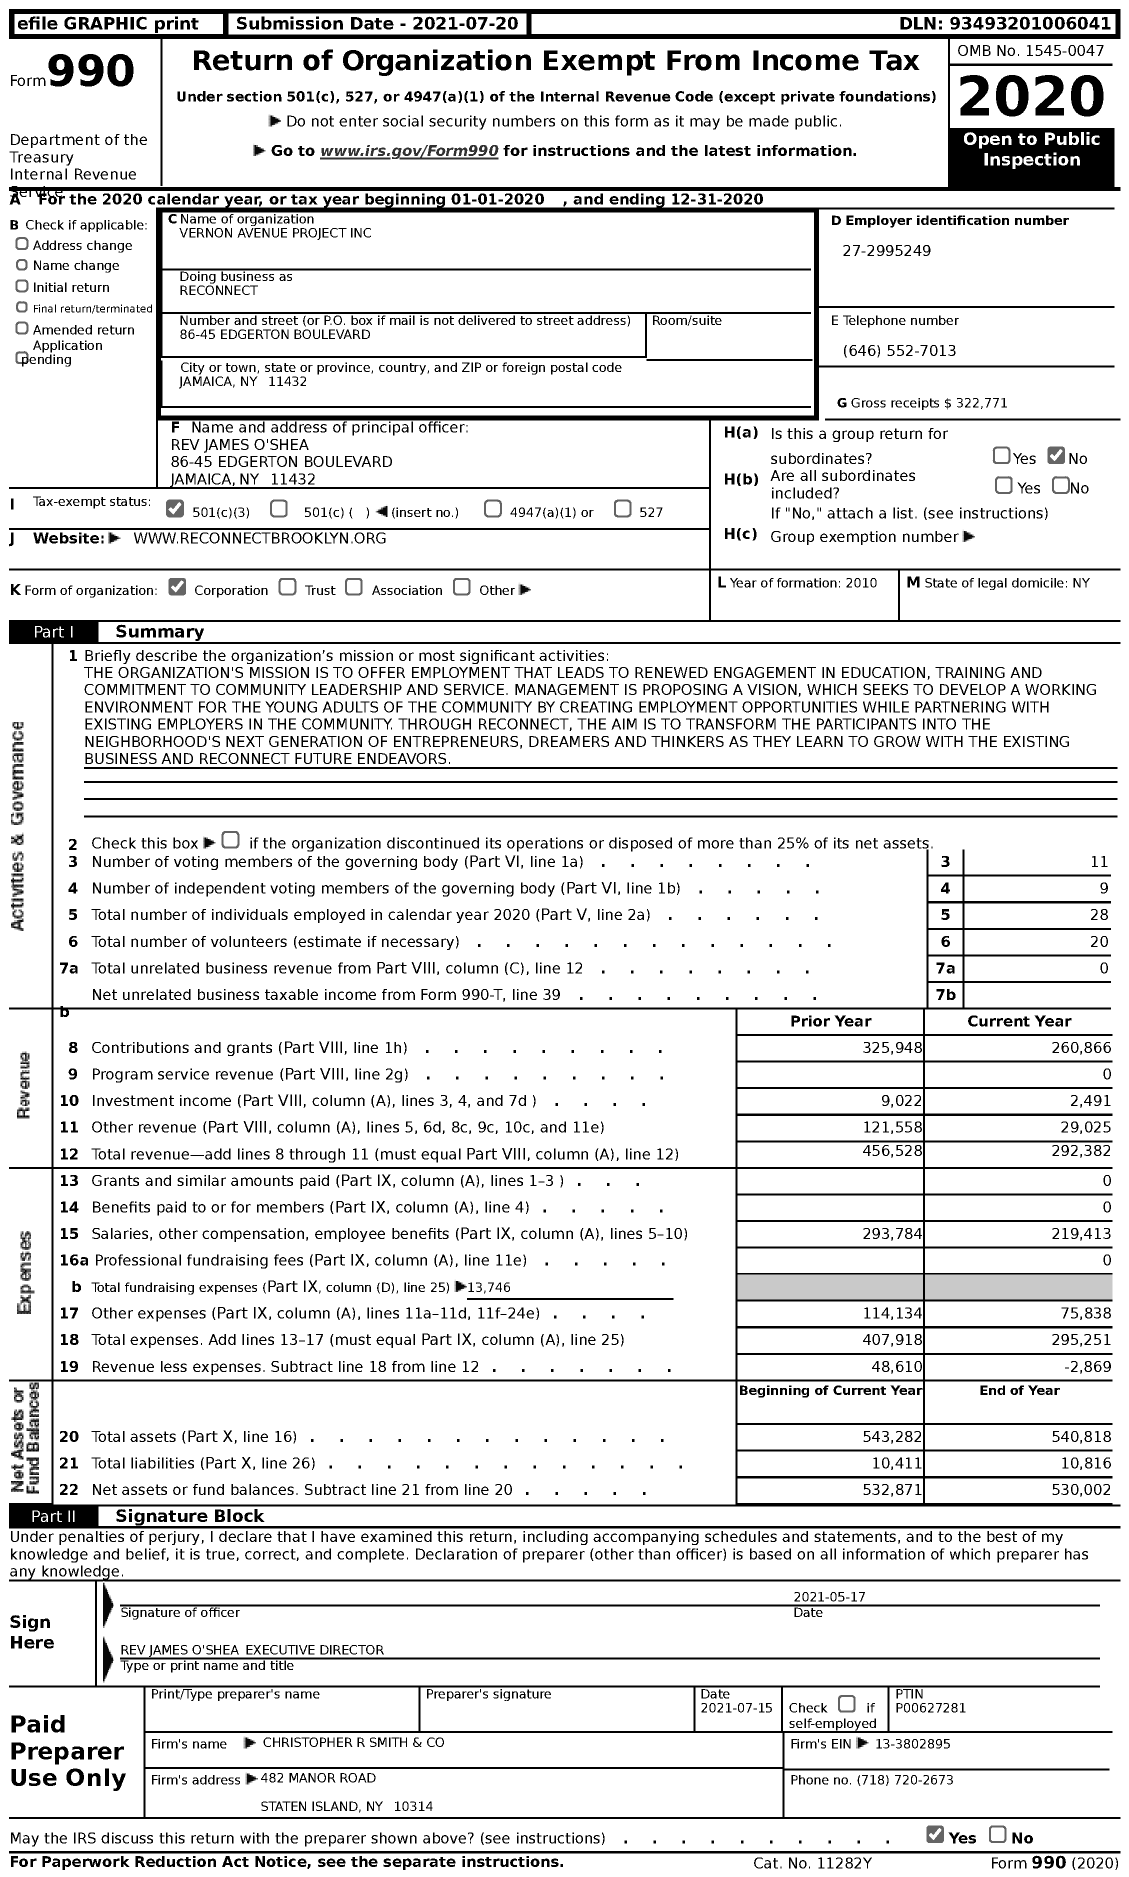 Image of first page of 2020 Form 990 for Reconnect / Vernon Avenue Project Inc